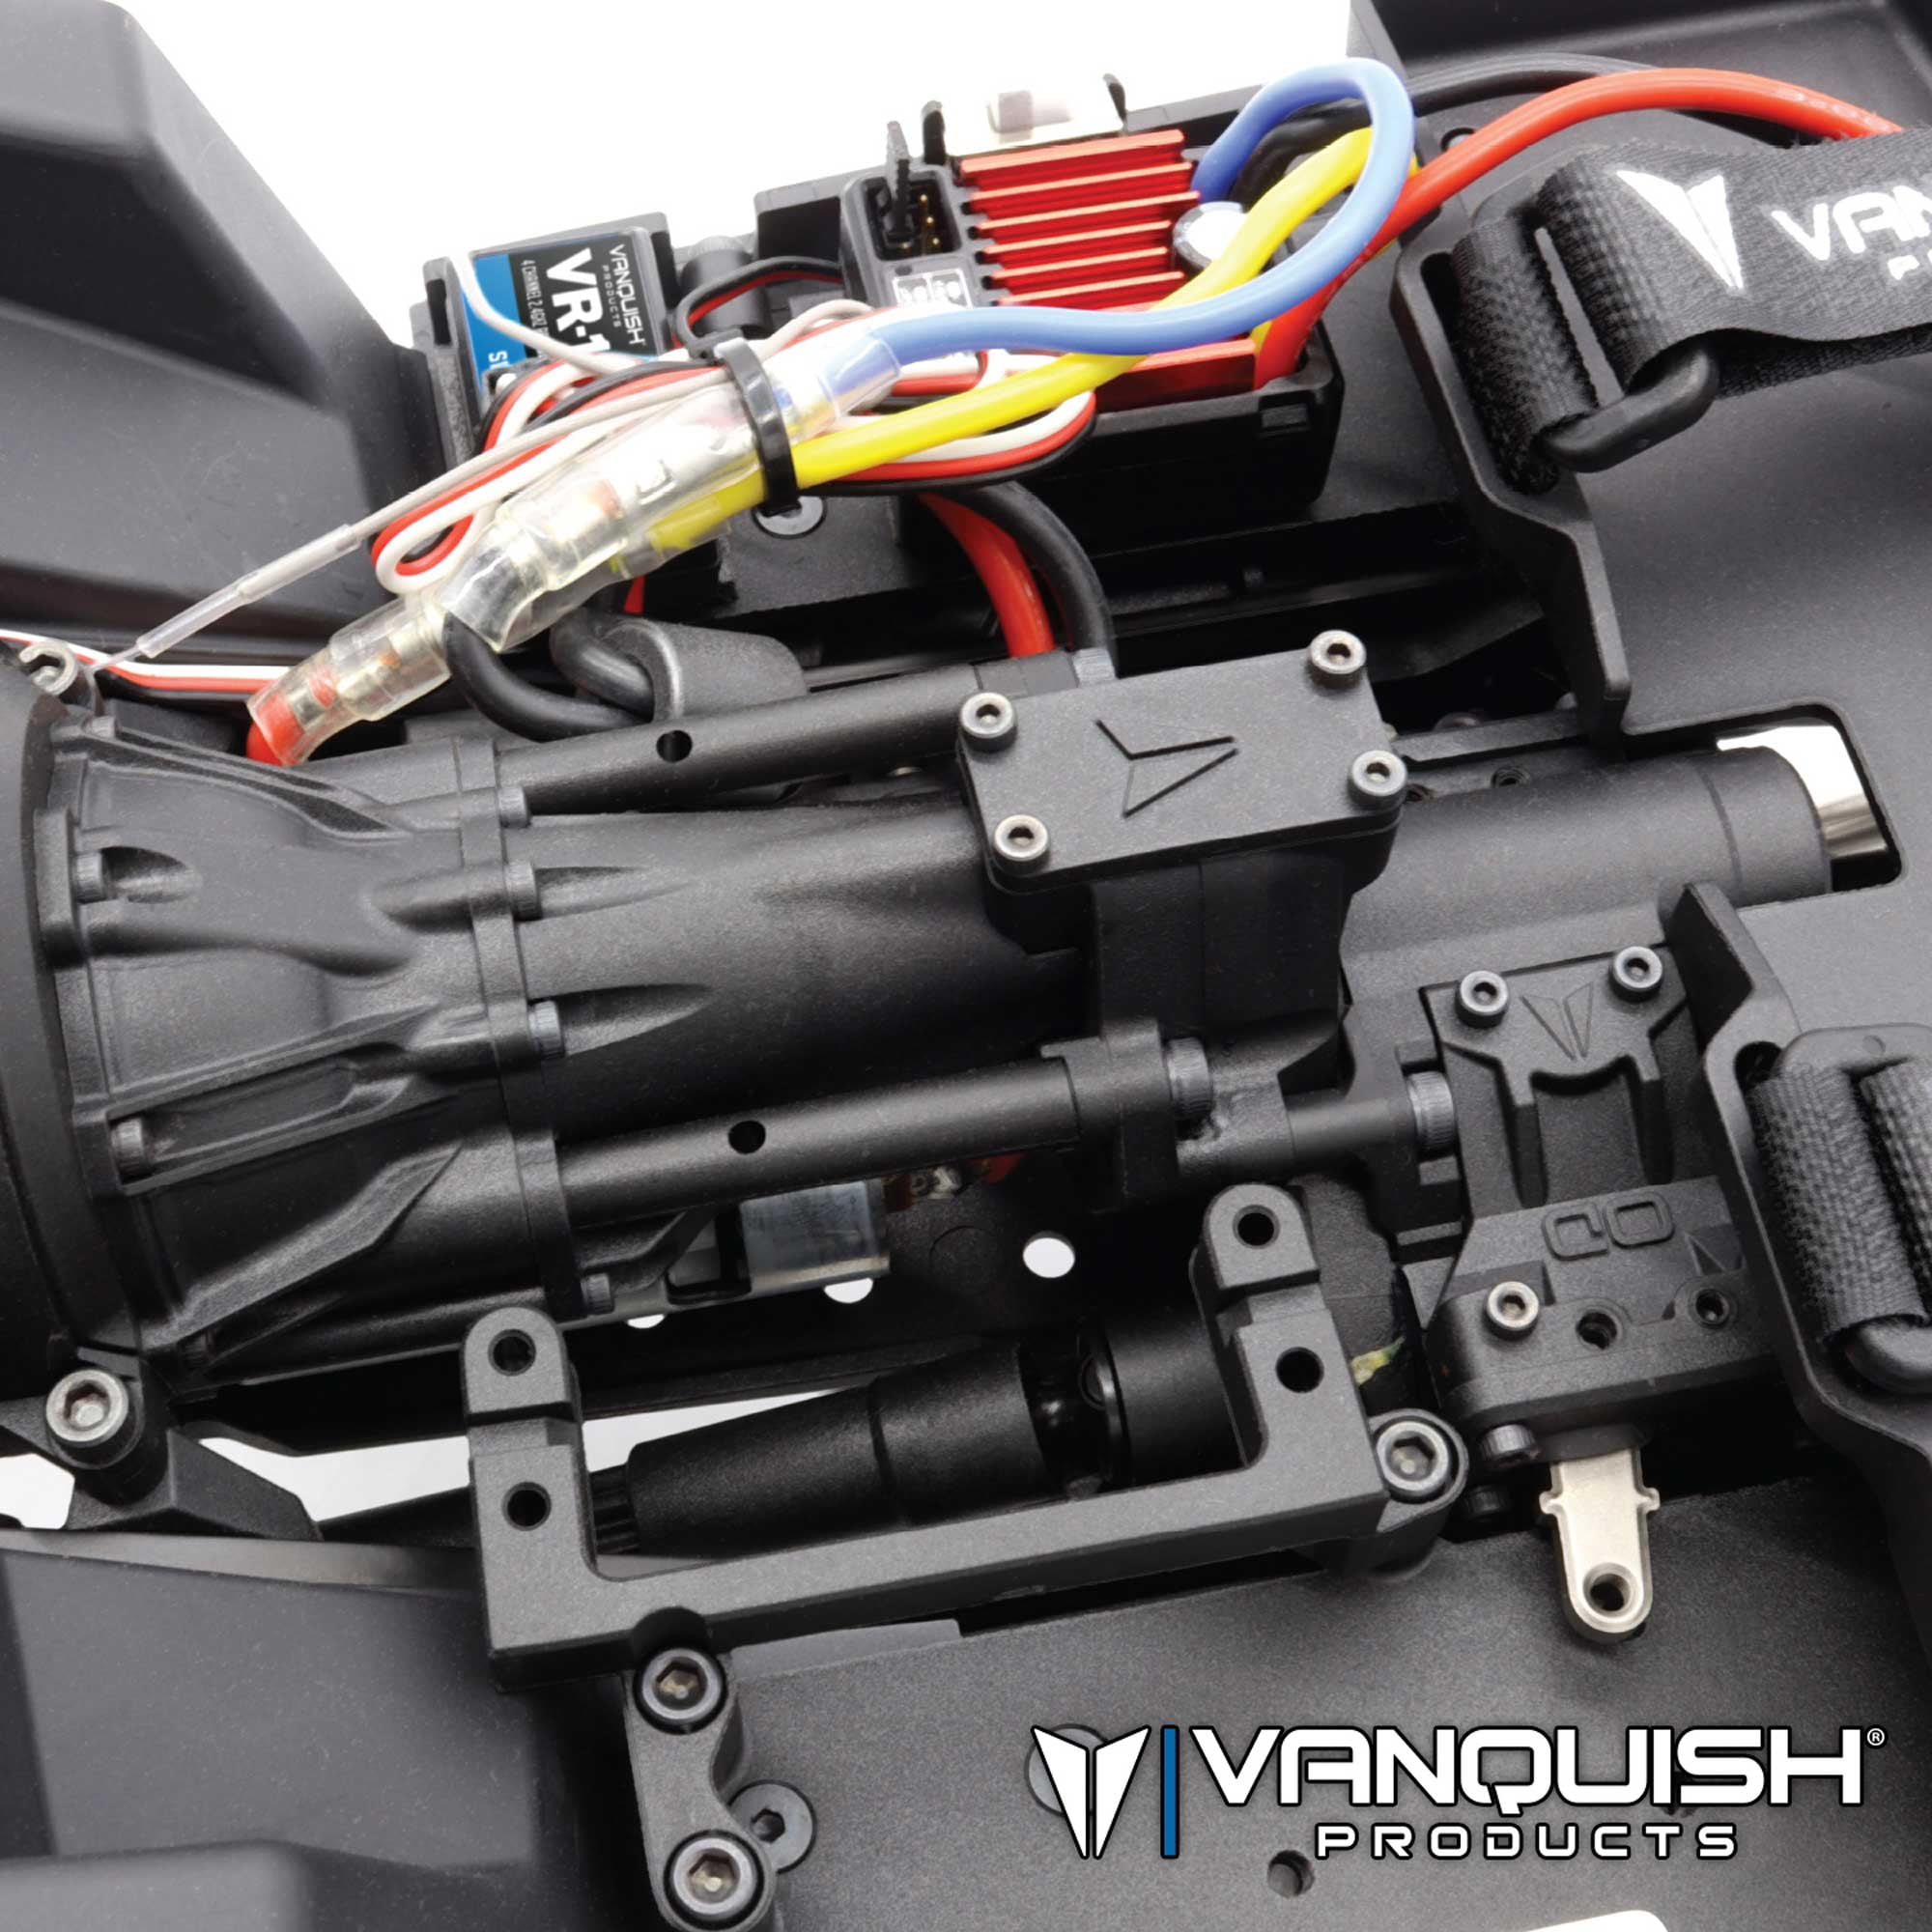 Vanquish Products Rubber Parts Tray - Blue VPS10162 Electric Motors &  Accessories